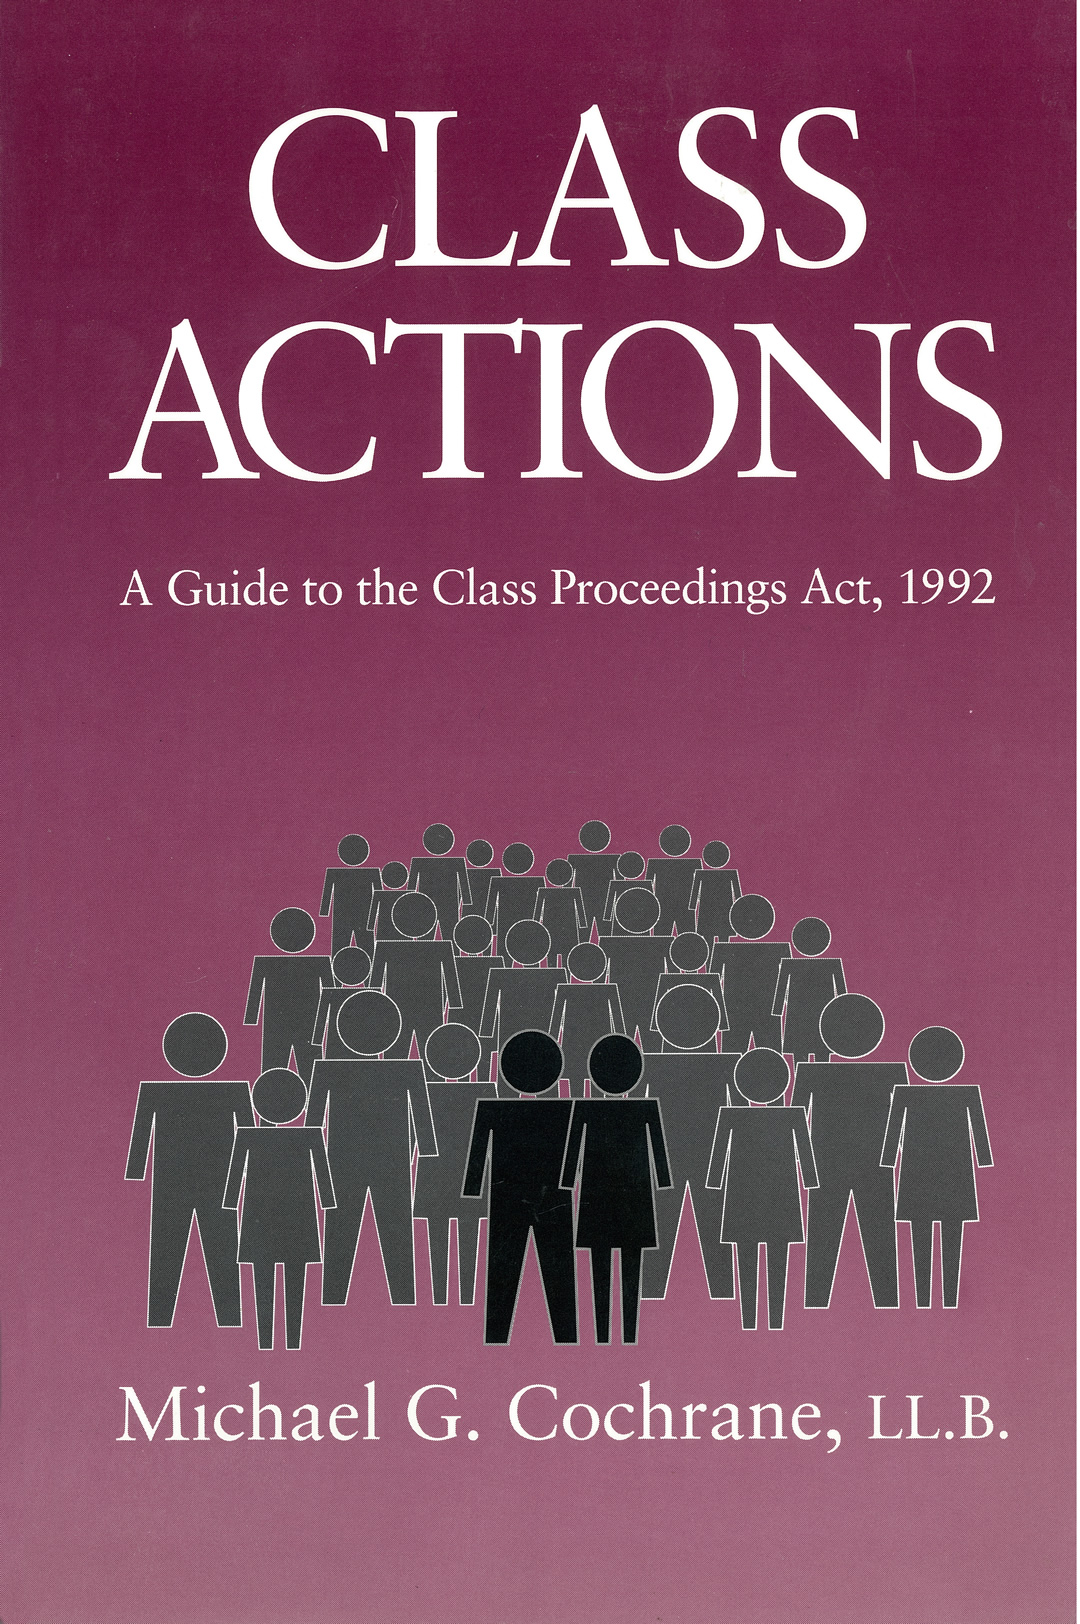 Class Actions: A Guide to the Class Proceedings Act, 1992